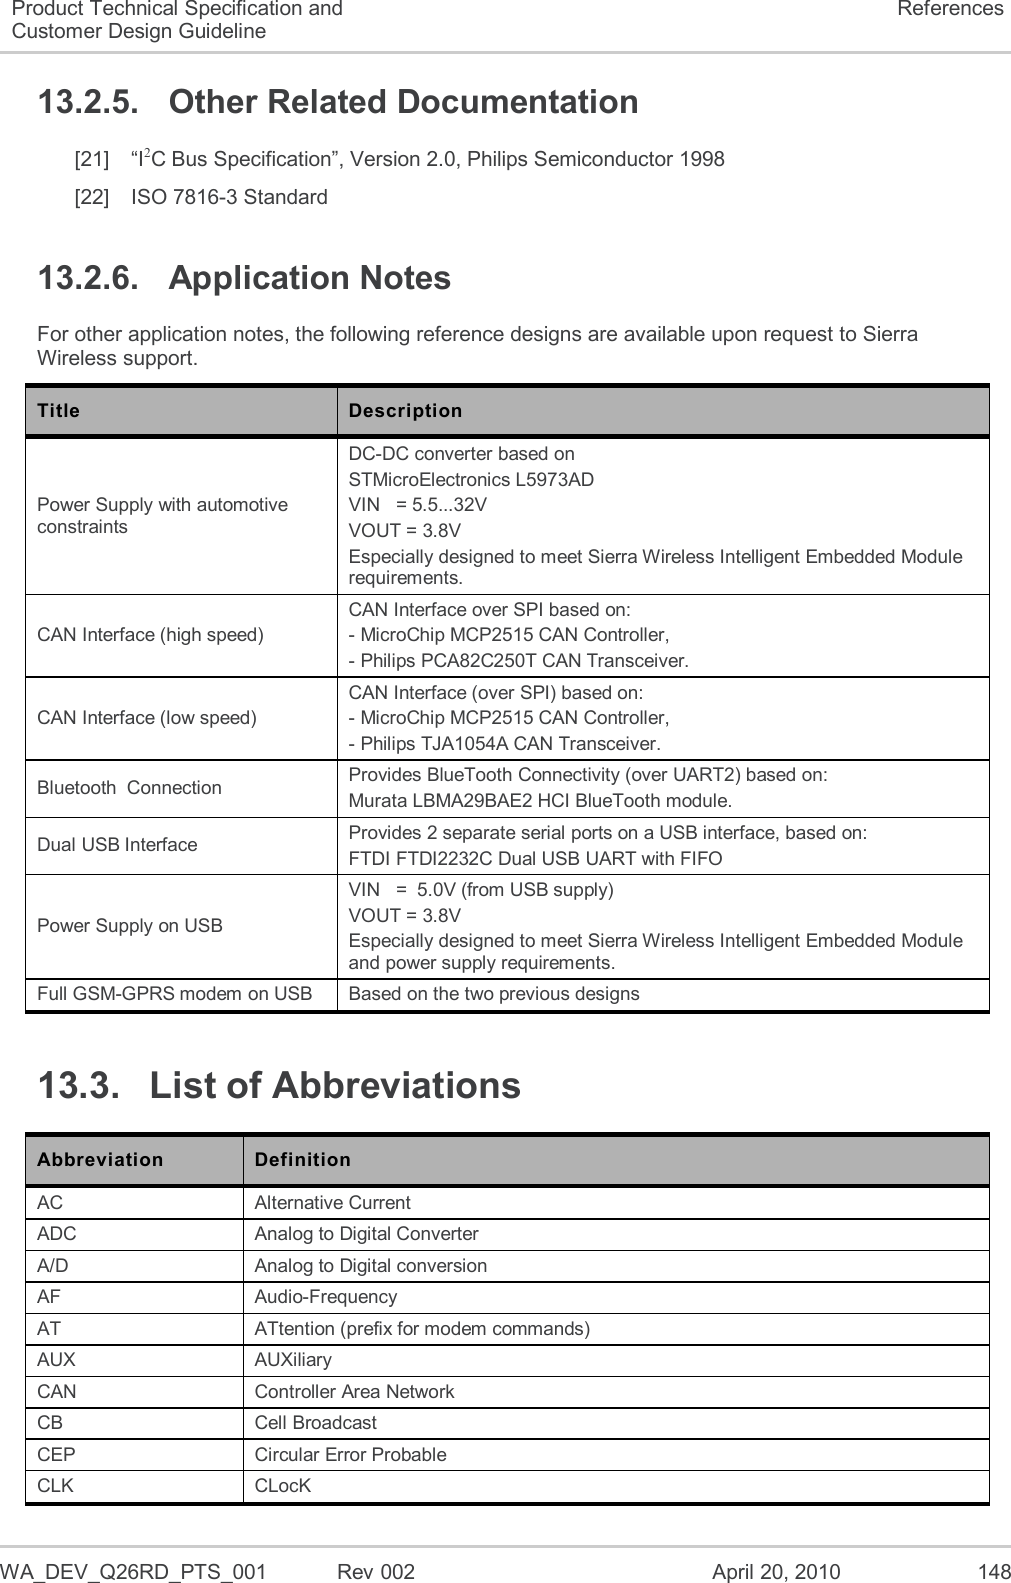   WA_DEV_Q26RD_PTS_001  Rev 002  April 20, 2010 148 Product Technical Specification and Customer Design Guideline References 13.2.5.  Other Related Documentation [21]  “I2C Bus Specification”, Version 2.0, Philips Semiconductor 1998 [22]  ISO 7816-3 Standard 13.2.6.  Application Notes For other application notes, the following reference designs are available upon request to Sierra Wireless support. Title Description Power Supply with automotive constraints DC-DC converter based on   STMicroElectronics L5973AD VIN   = 5.5...32V VOUT = 3.8V Especially designed to meet Sierra Wireless Intelligent Embedded Module requirements. CAN Interface (high speed) CAN Interface over SPI based on: - MicroChip MCP2515 CAN Controller, - Philips PCA82C250T CAN Transceiver. CAN Interface (low speed) CAN Interface (over SPI) based on: - MicroChip MCP2515 CAN Controller, - Philips TJA1054A CAN Transceiver. Bluetooth  Connection Provides BlueTooth Connectivity (over UART2) based on:  Murata LBMA29BAE2 HCI BlueTooth module. Dual USB Interface Provides 2 separate serial ports on a USB interface, based on: FTDI FTDI2232C Dual USB UART with FIFO Power Supply on USB  VIN   =  5.0V (from USB supply) VOUT = 3.8V Especially designed to meet Sierra Wireless Intelligent Embedded Module and power supply requirements. Full GSM-GPRS modem on USB Based on the two previous designs 13.3.  List of Abbreviations Abbreviation Definition AC Alternative Current ADC Analog to Digital Converter A/D Analog to Digital conversion AF Audio-Frequency AT ATtention (prefix for modem commands) AUX AUXiliary CAN Controller Area Network CB Cell Broadcast CEP Circular Error Probable CLK CLocK 